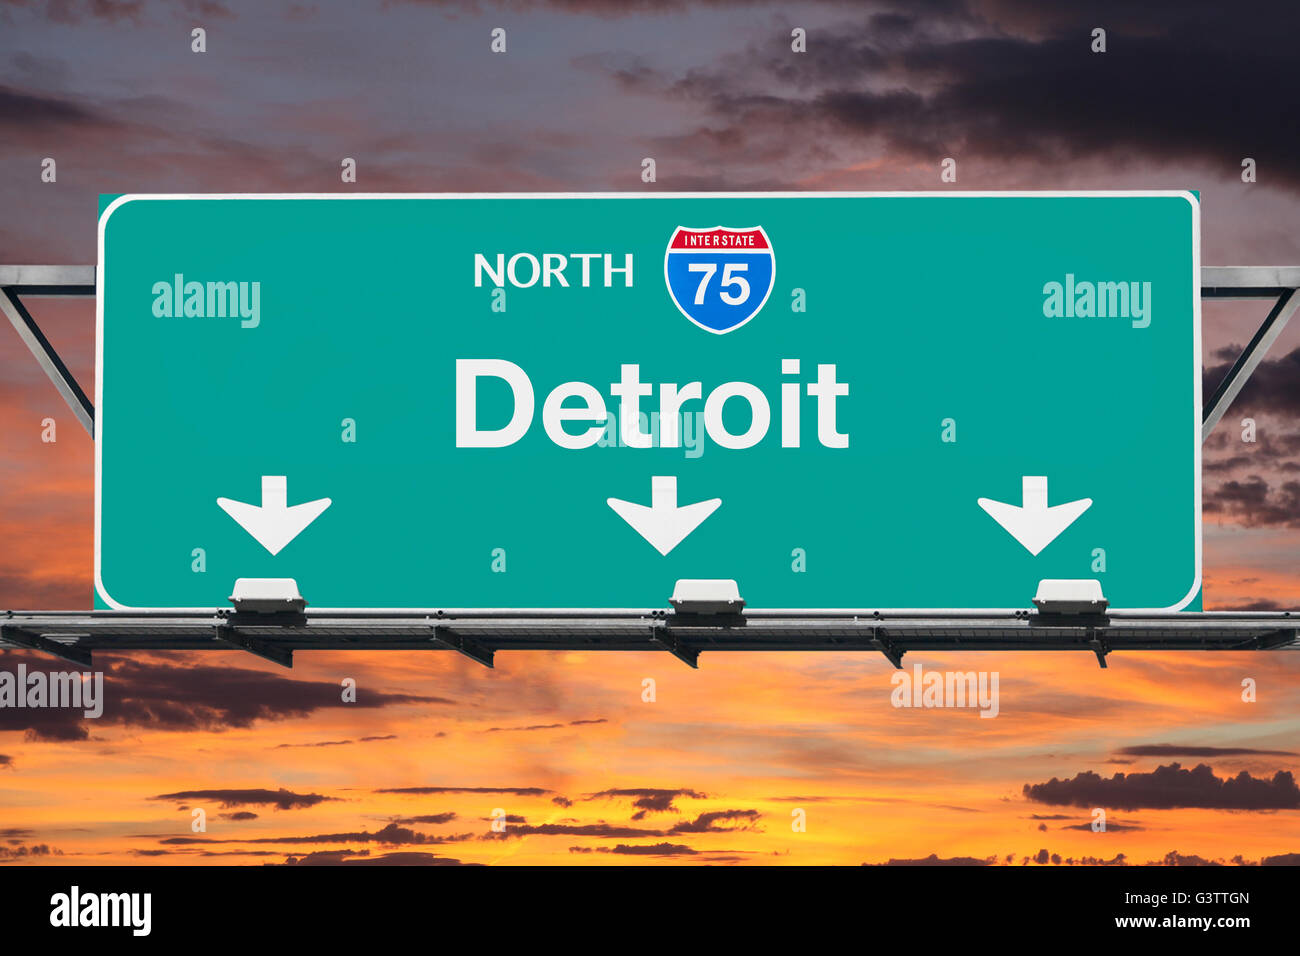 Detroit Michigan Interstate 75 north highway sign with sunrise sky. Stock Photo